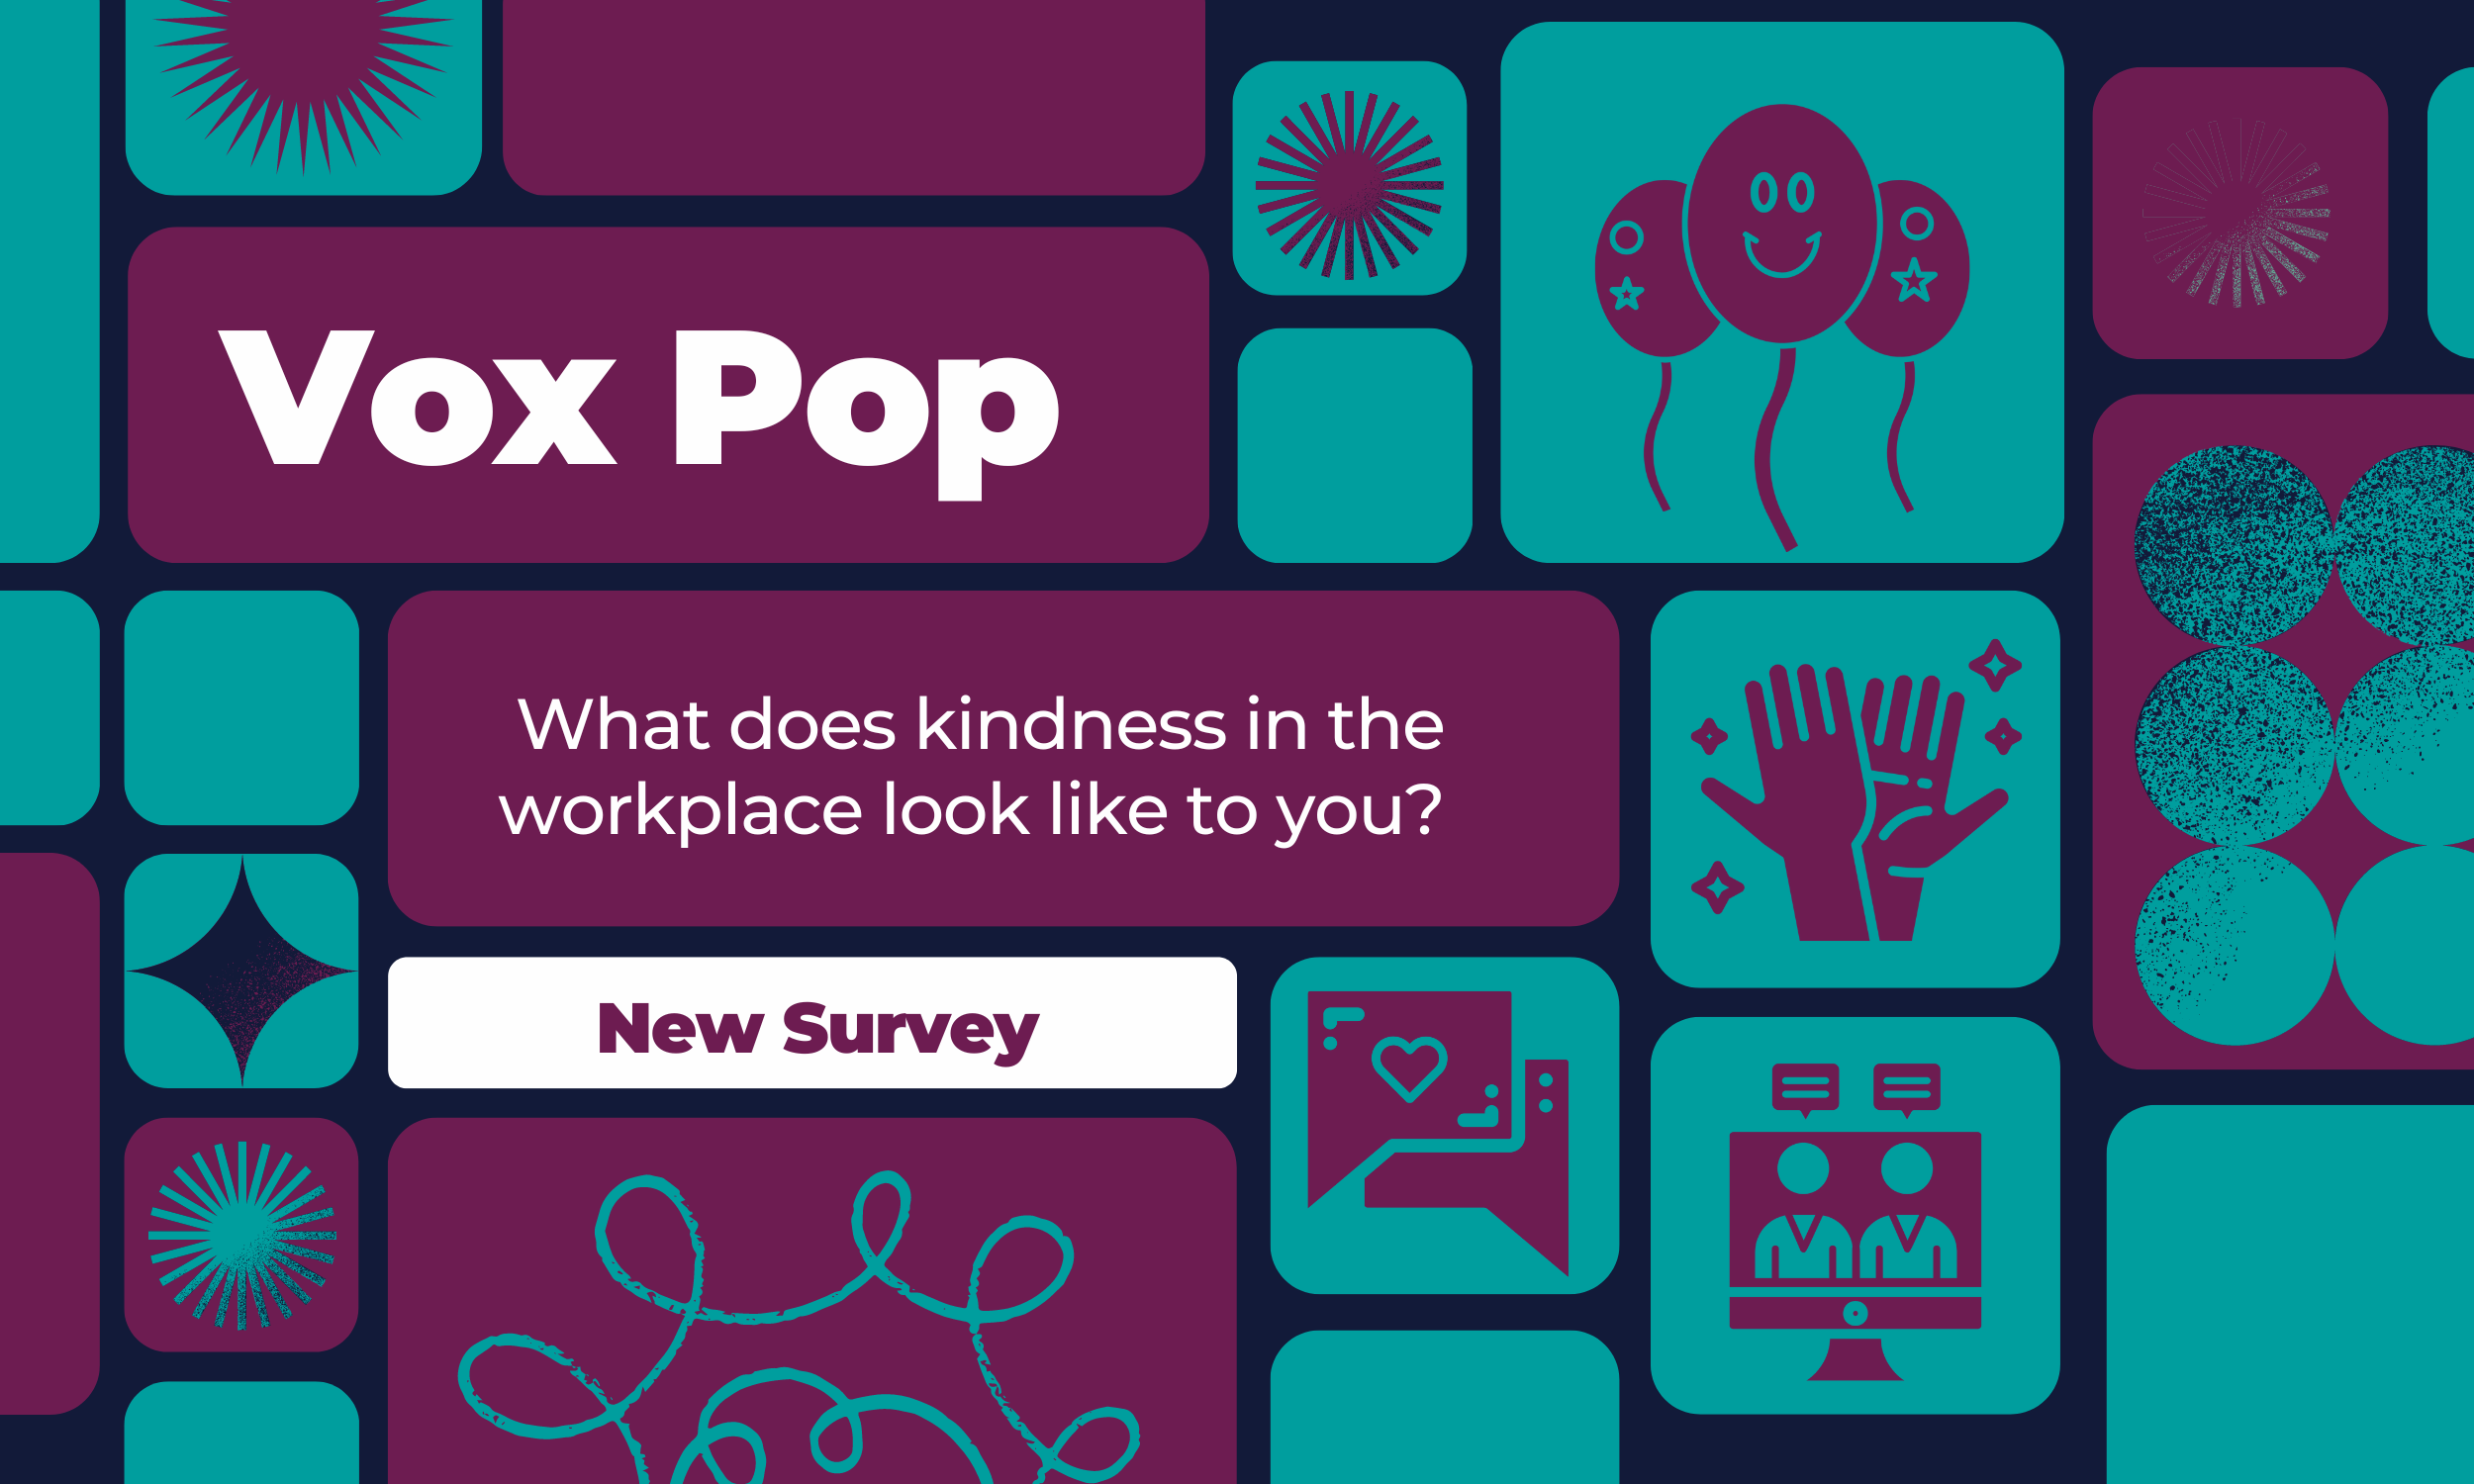 Title card for new "Vox Pop" survey asking, "What does kindness in the workplace look like to you?"